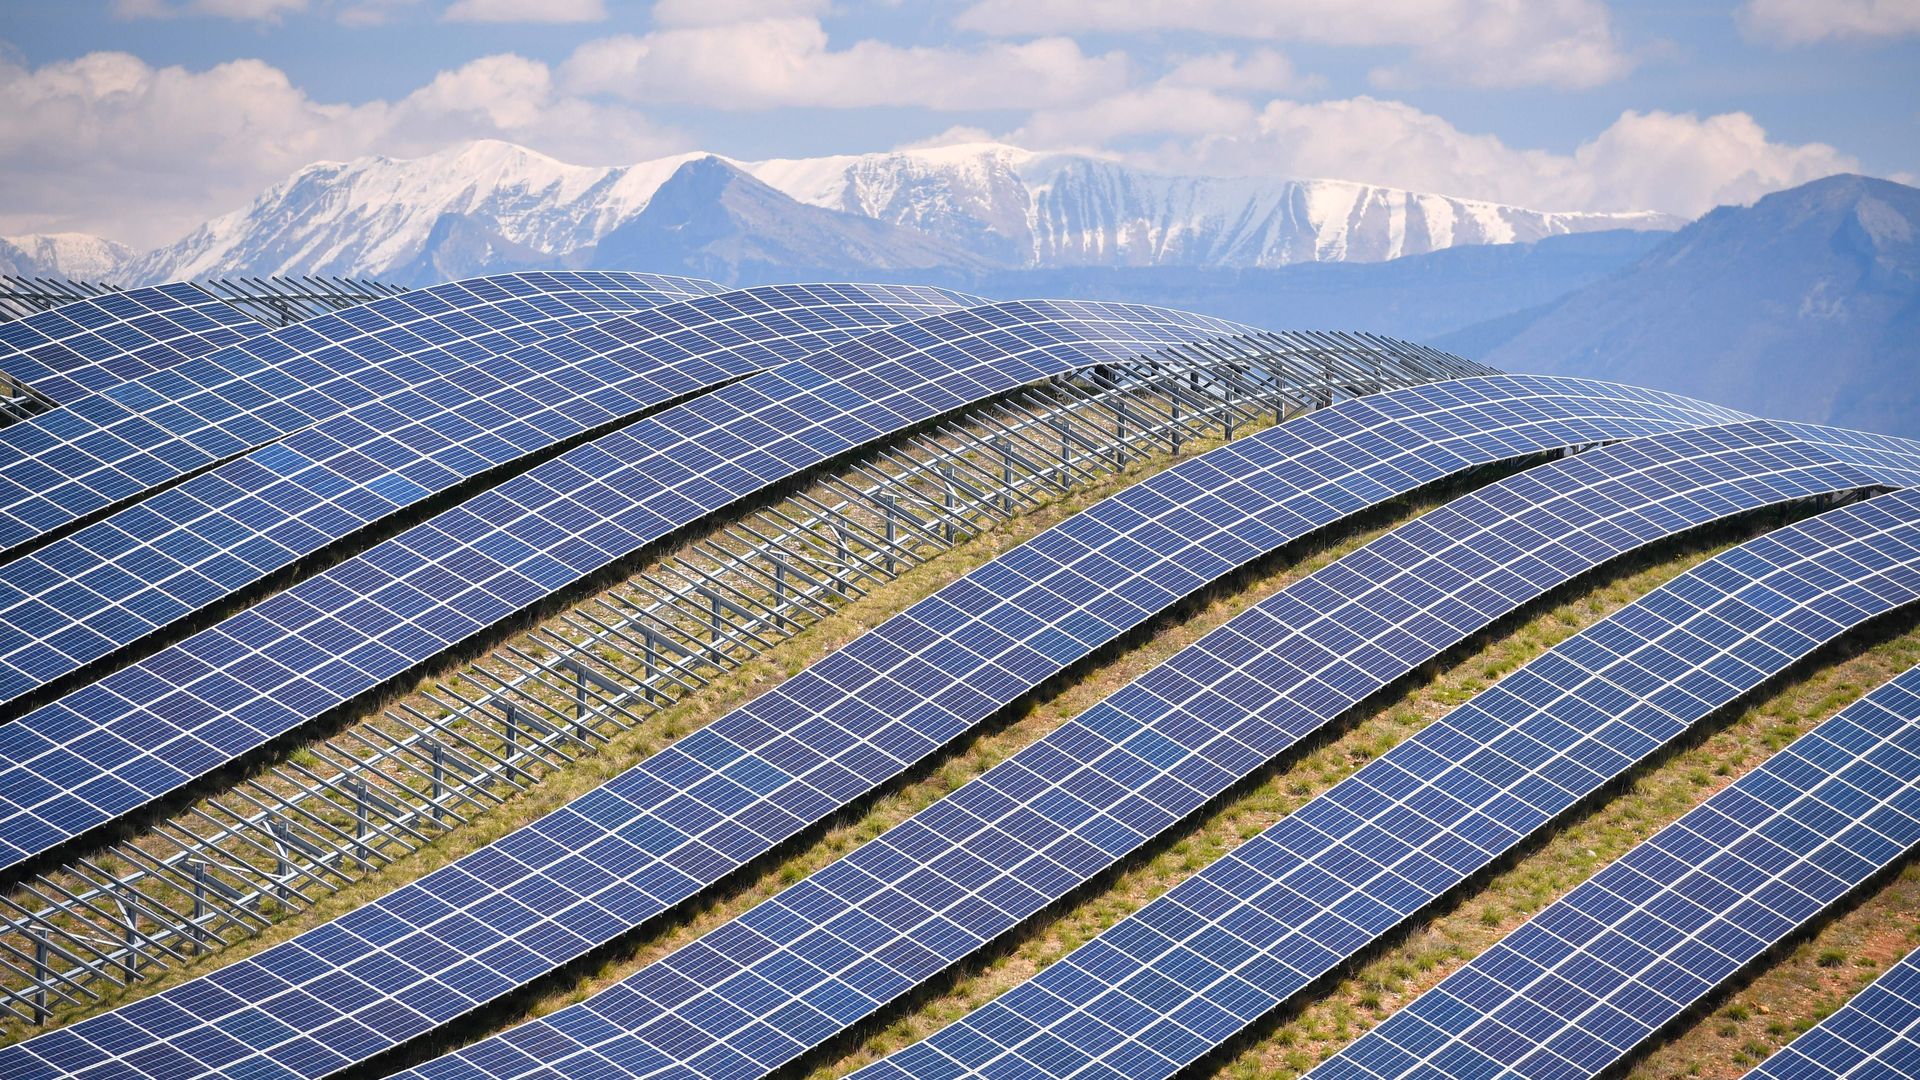 A general view shows the photovoltaic solar pannels at the power plant in La Colle des Mees, Alpes de Haute Provence, southeastern France, on April 17, 2019.